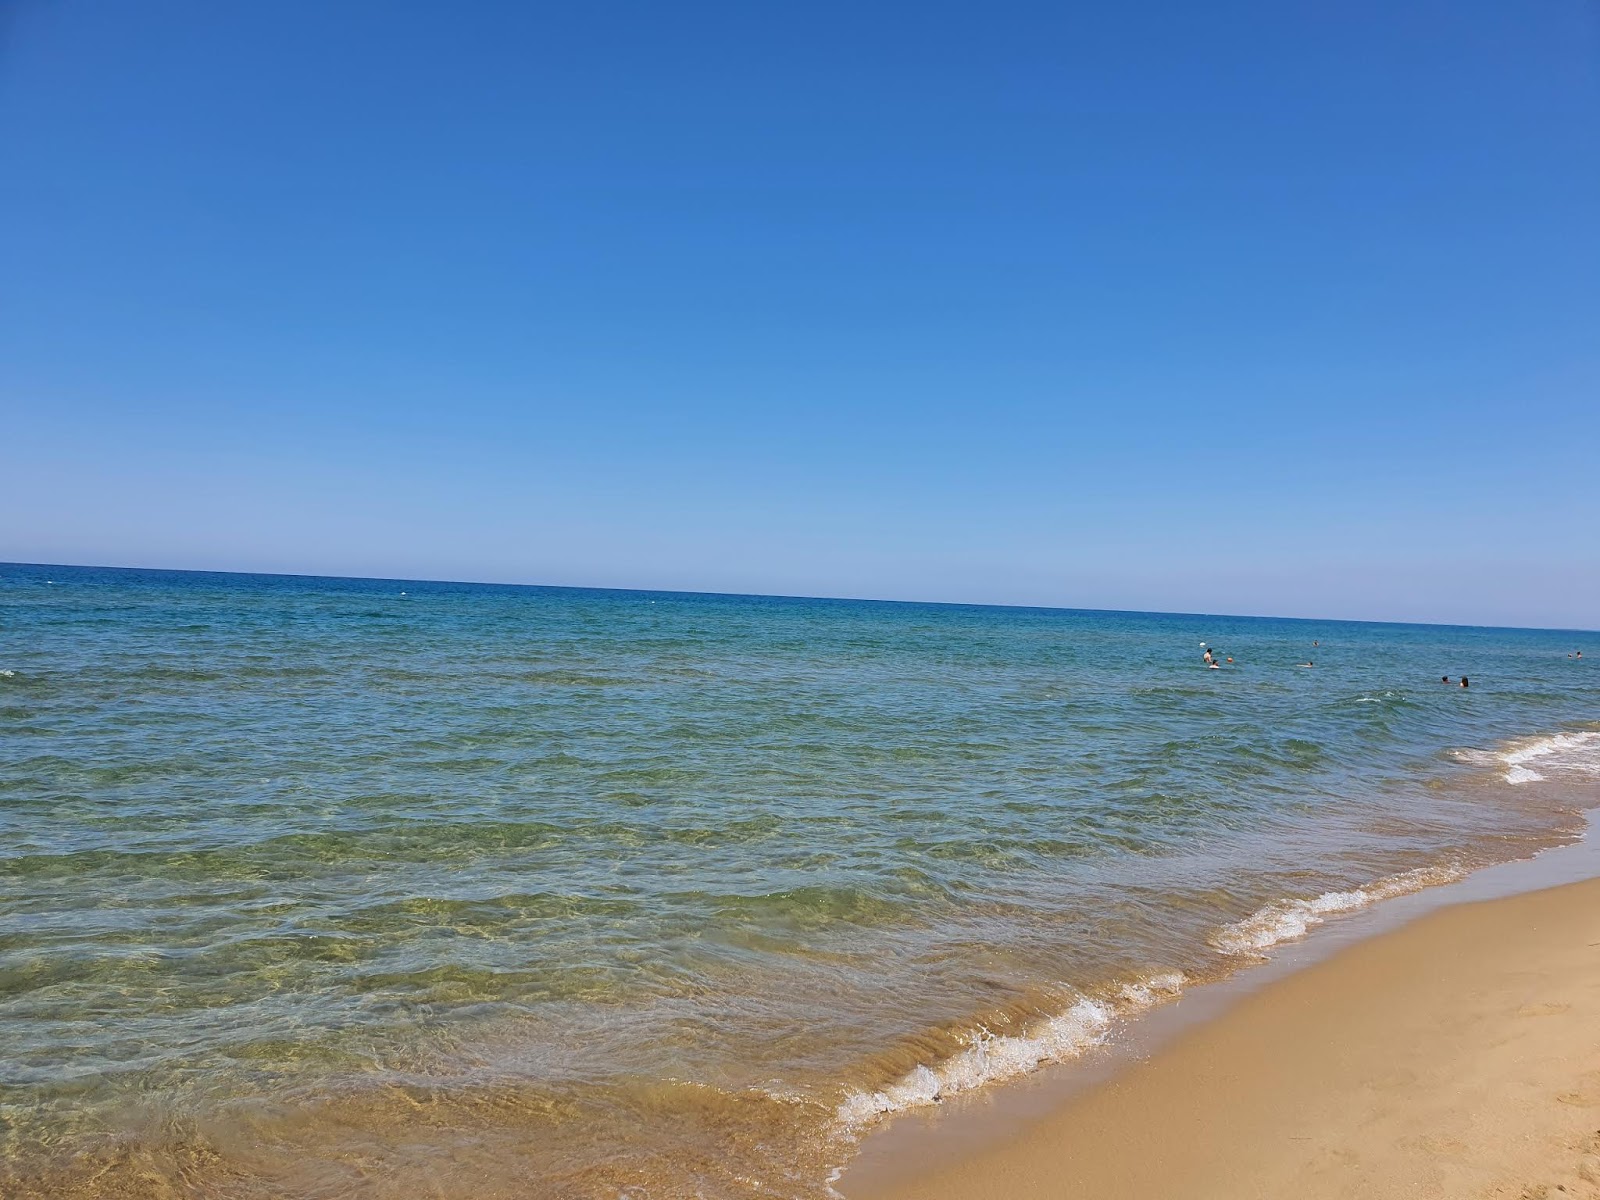 Photo of Spiaggia di Sabaudia with long straight shore